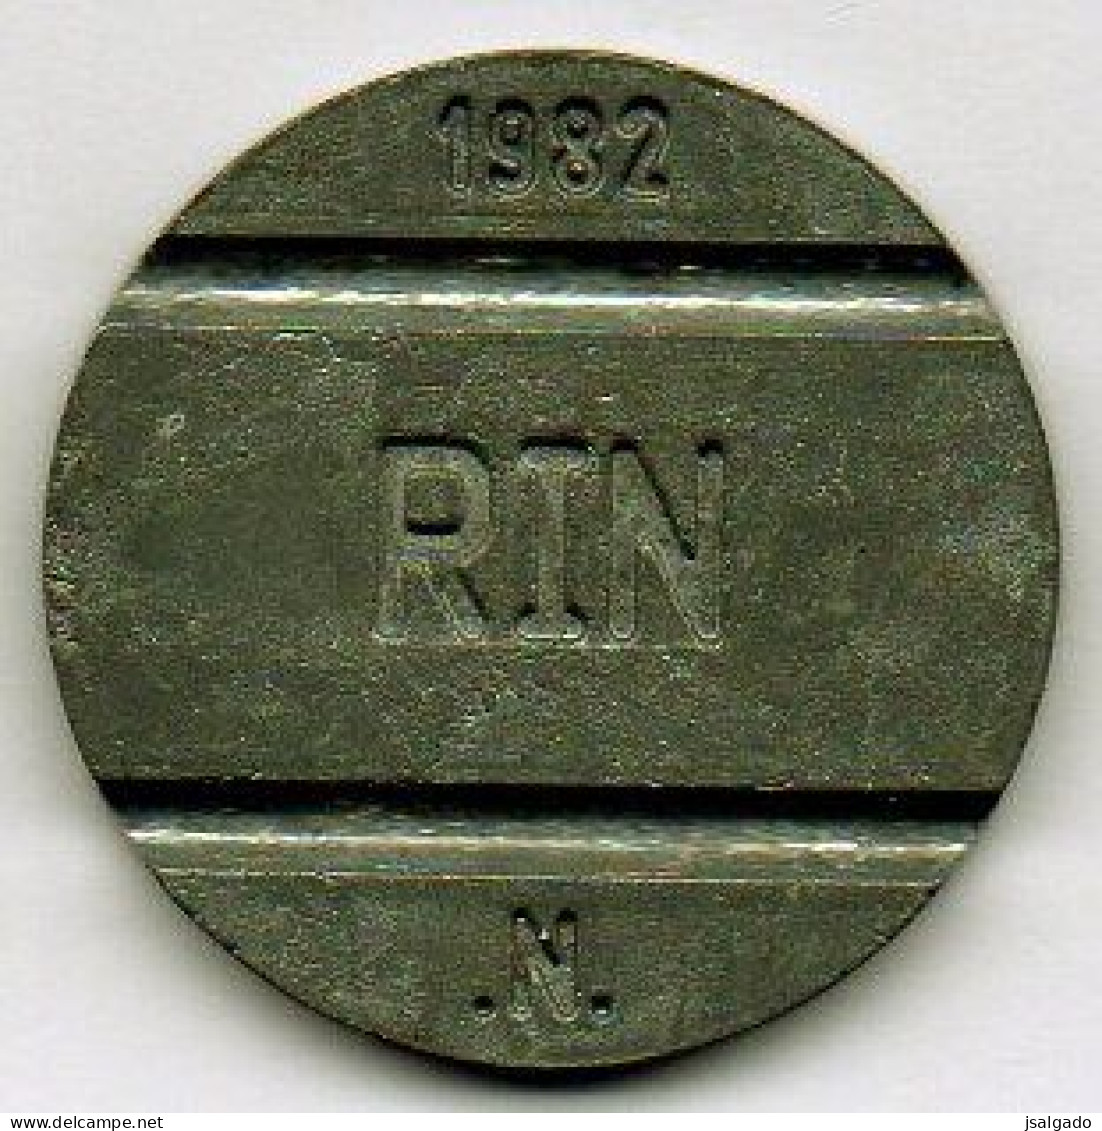 Perú  Telephone Token    1982  (g)  RIN  (g)  .N. With Two Dots   /  CPTSA  (g)  Telephone In Circle - Monetary /of Necessity